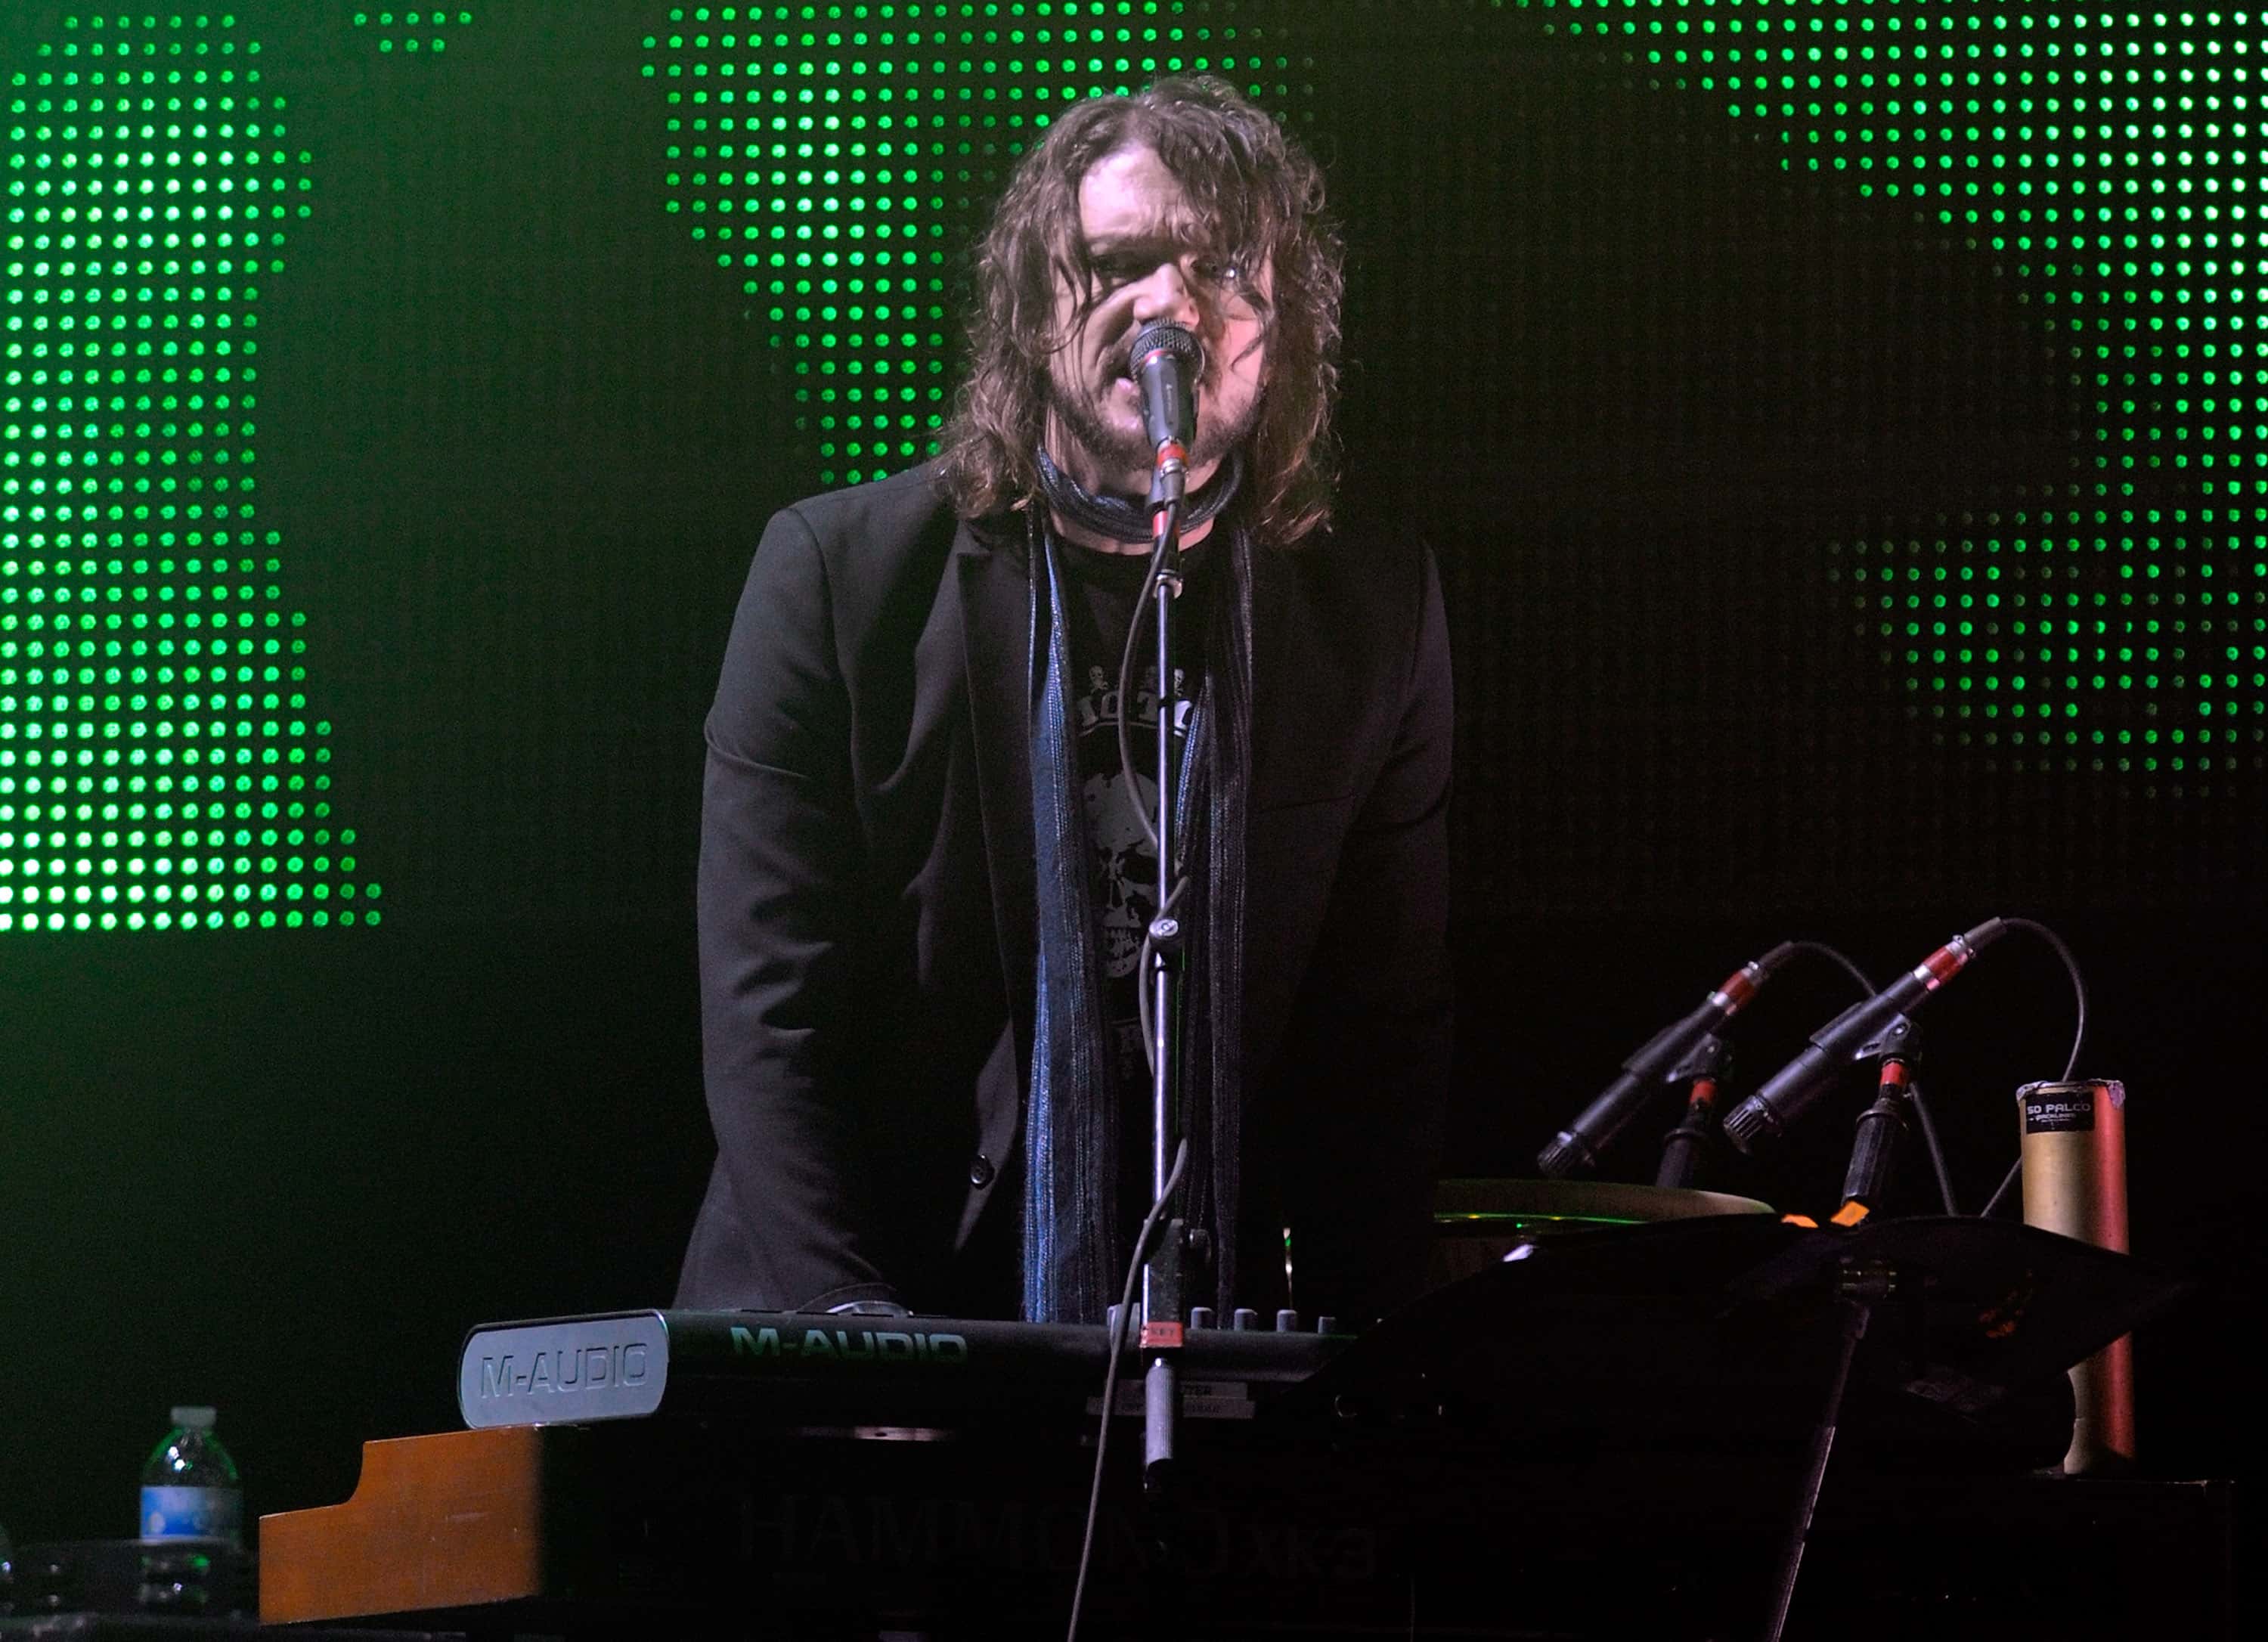 <p>Guns N’ Roses also added keyboardist Dizzy Reed to their roster in 1990. He has continued to play and tour with the band ever since.</p>